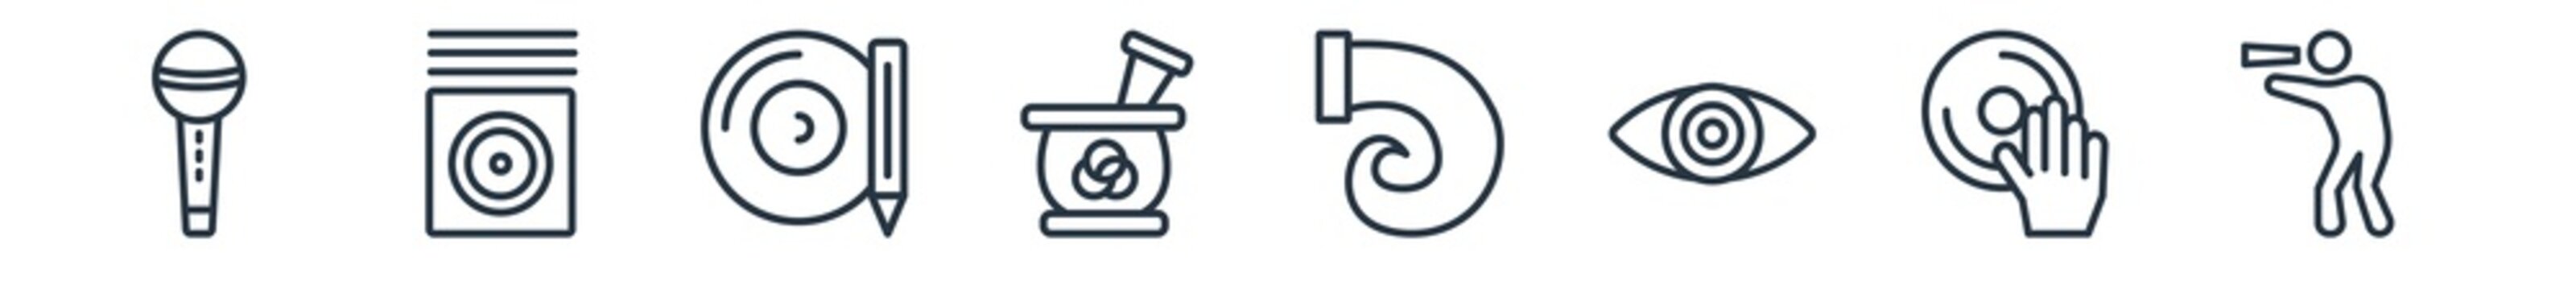 linear set of music outline icons. line vector icons such as microphone for singers, song note, cd writer, tibetan, nautilus, pied piper of hamelin vector illustration.